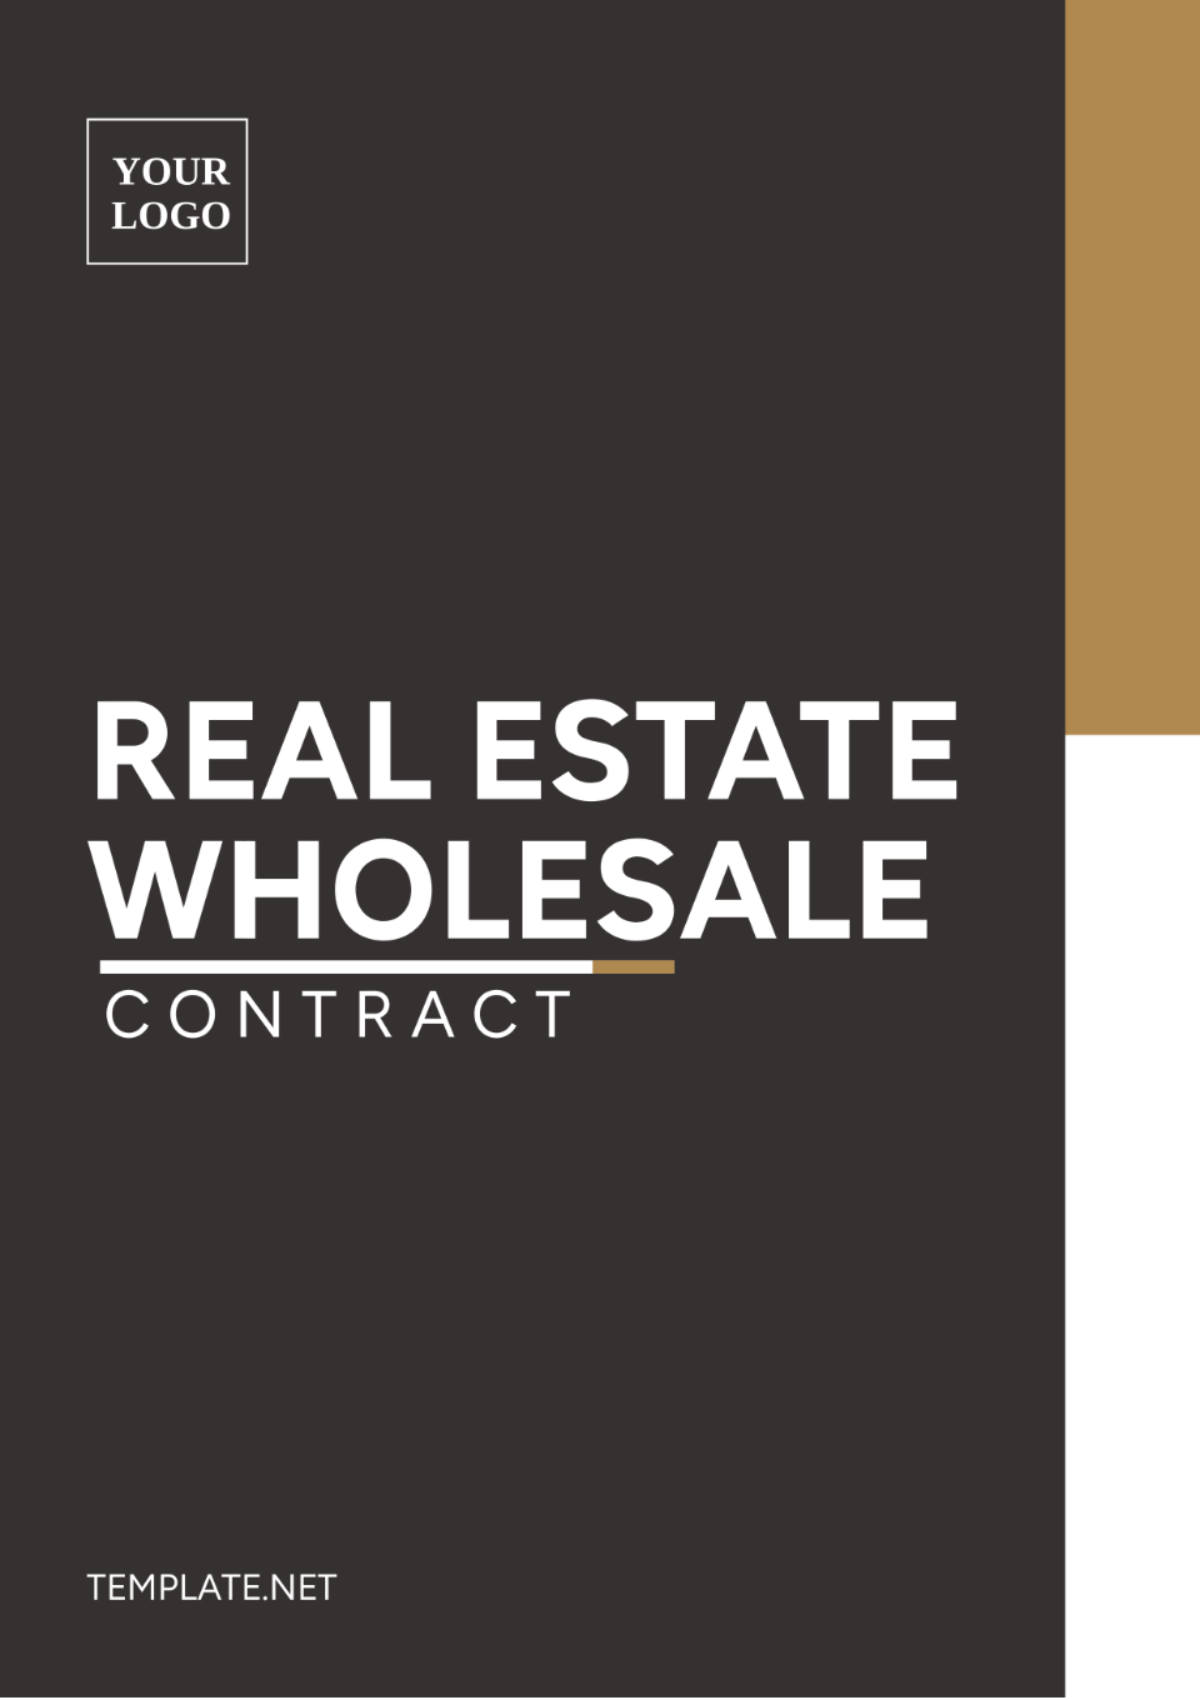 Real Estate Wholesale Contract Template